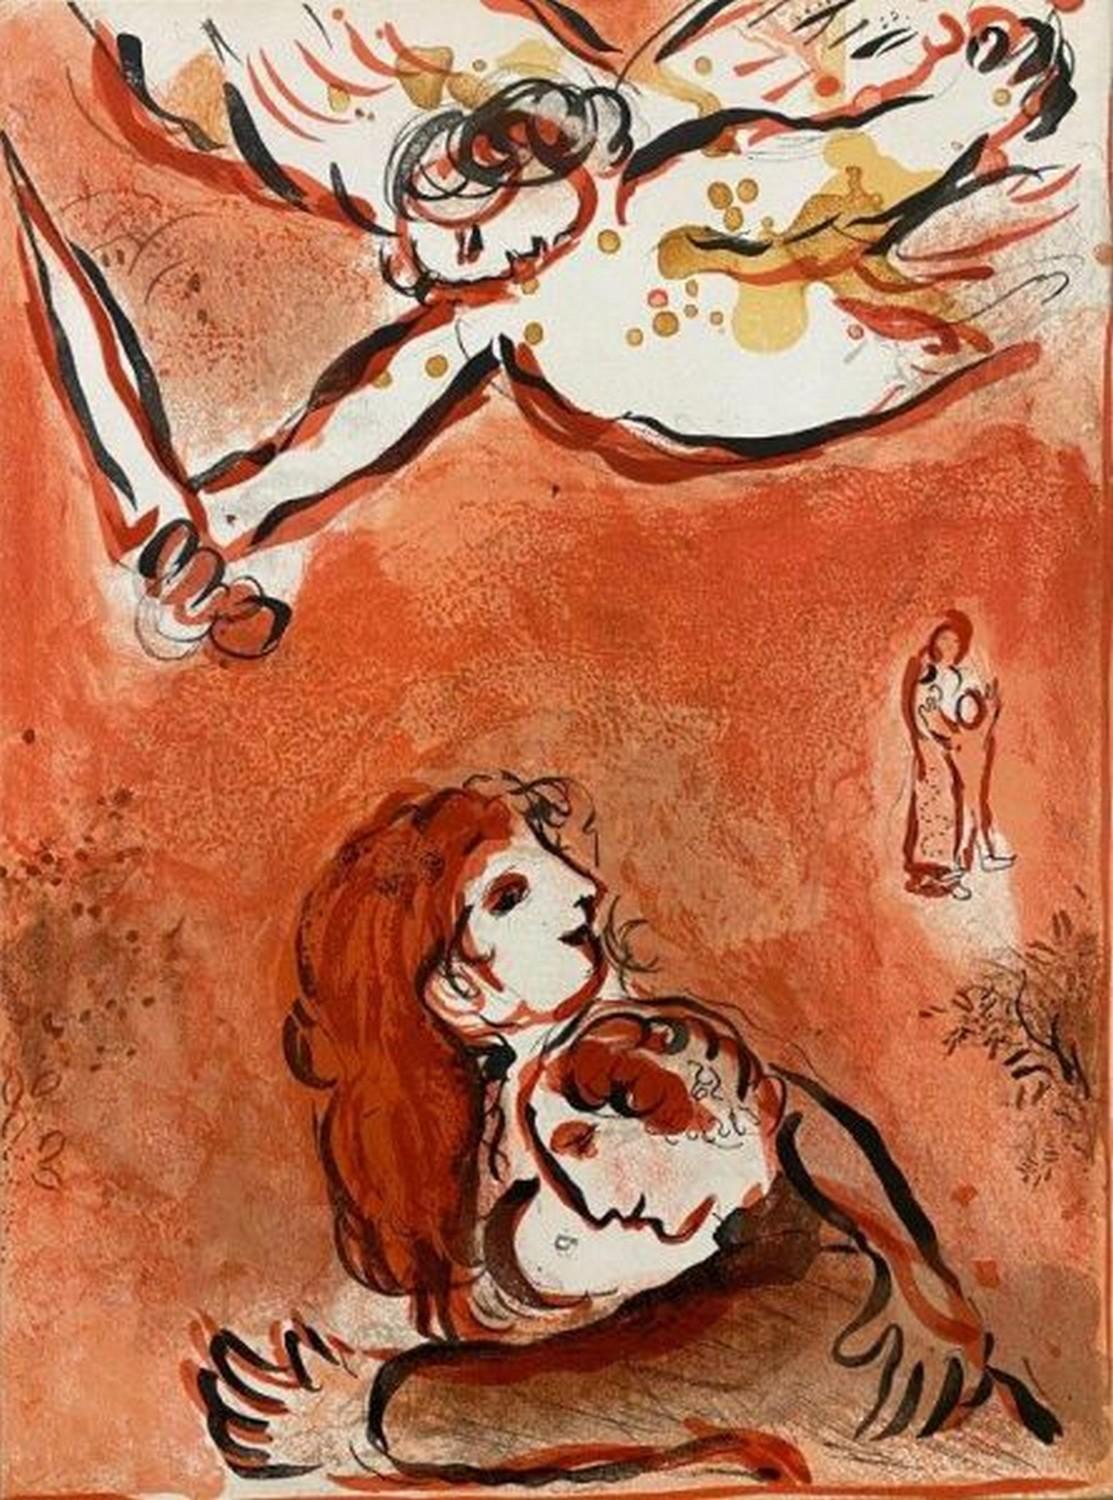 Marc Chagall Abstract Print - The Virgin of israel / The Face of Israel